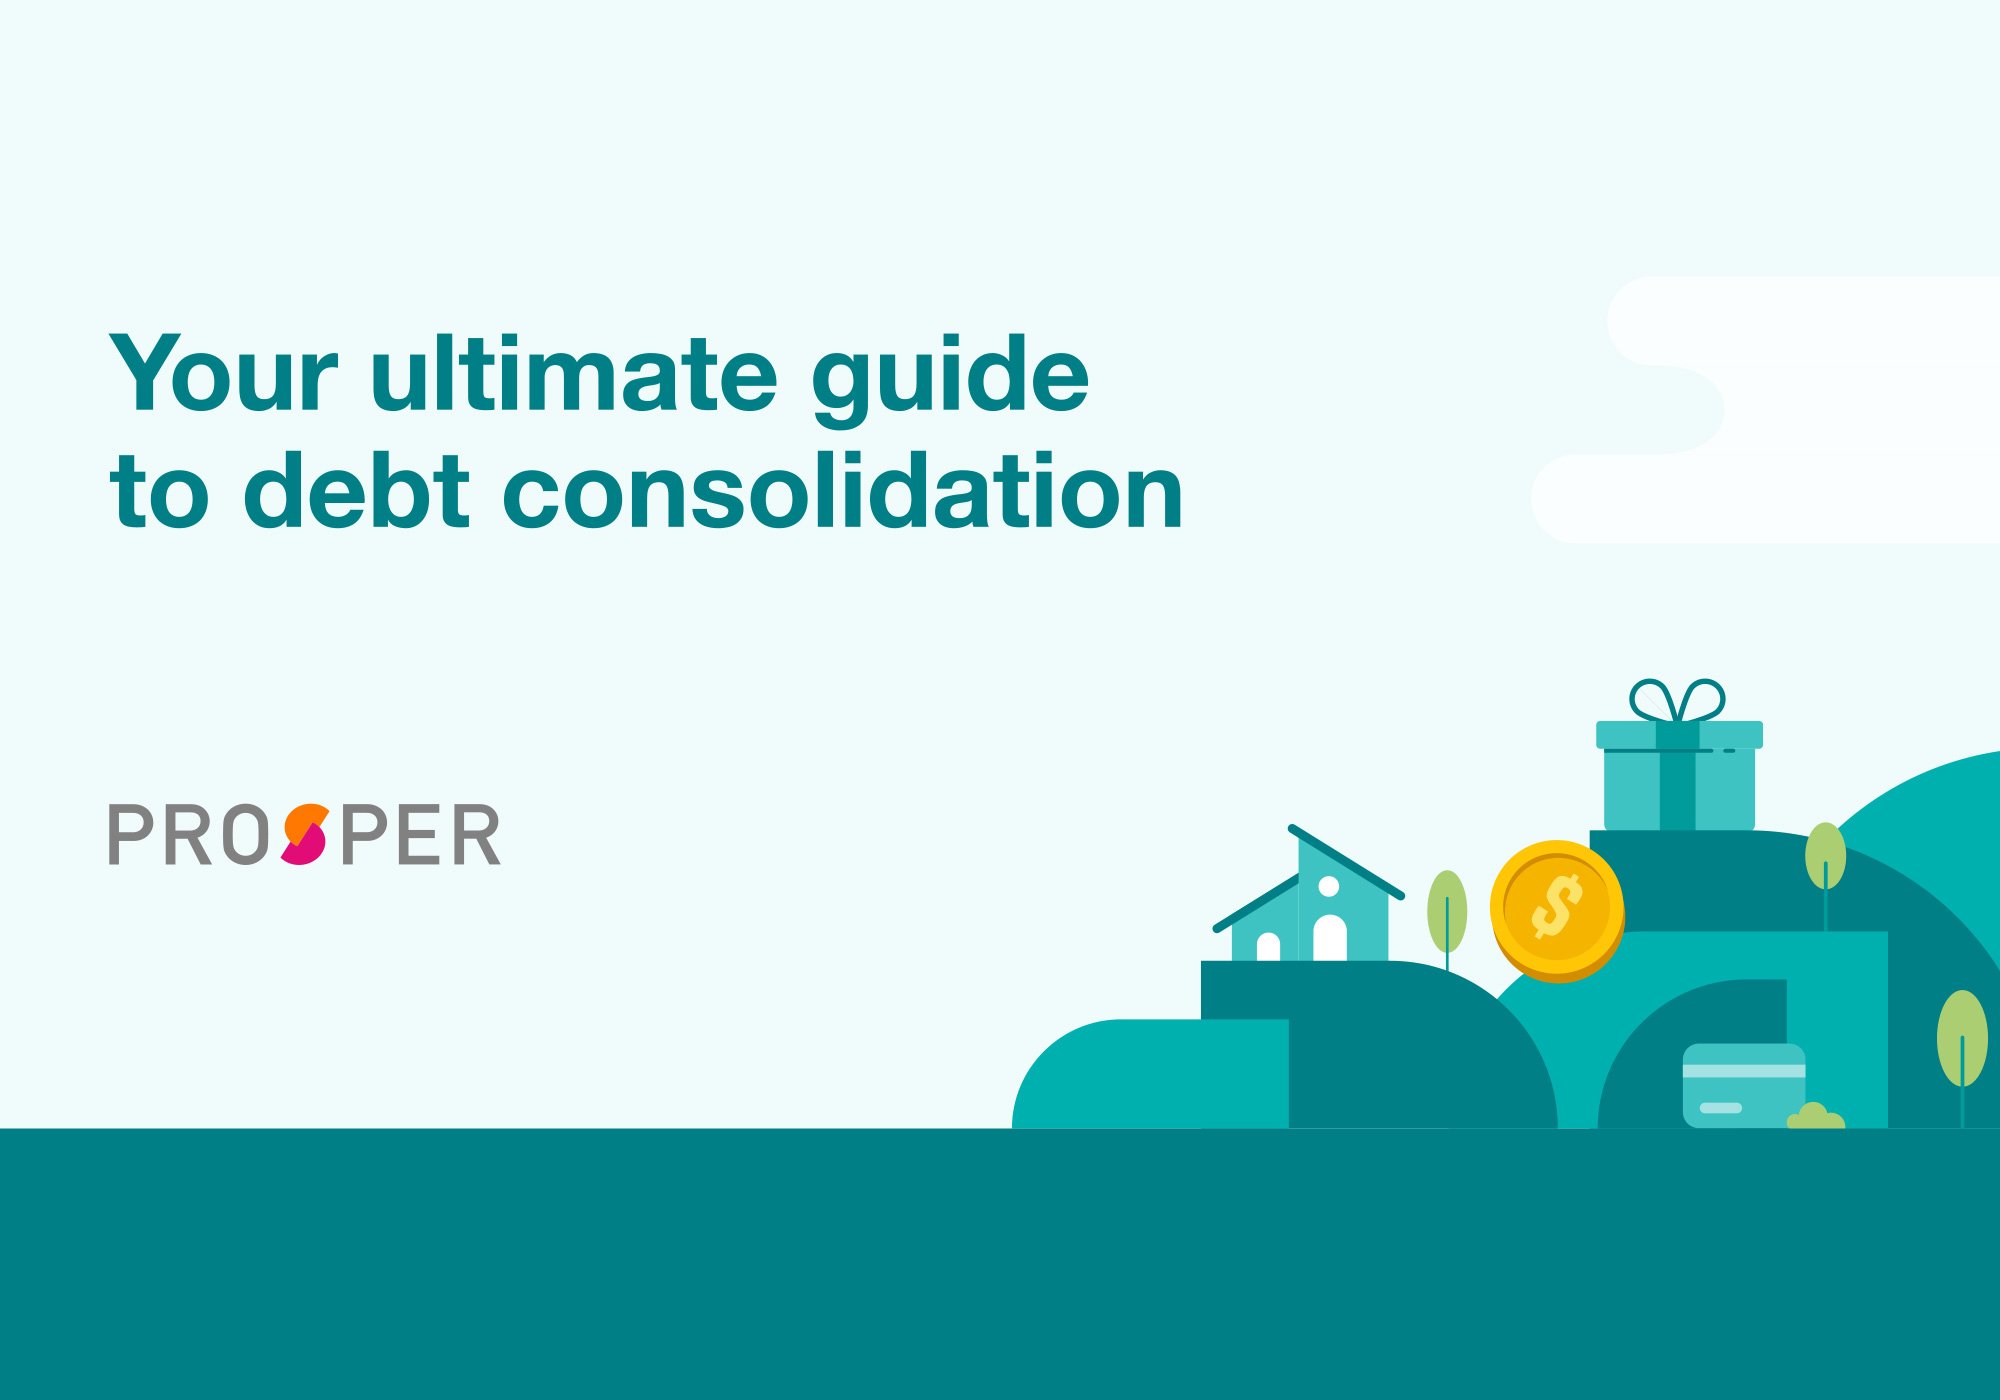 Your ultimate guide to debt consolidation